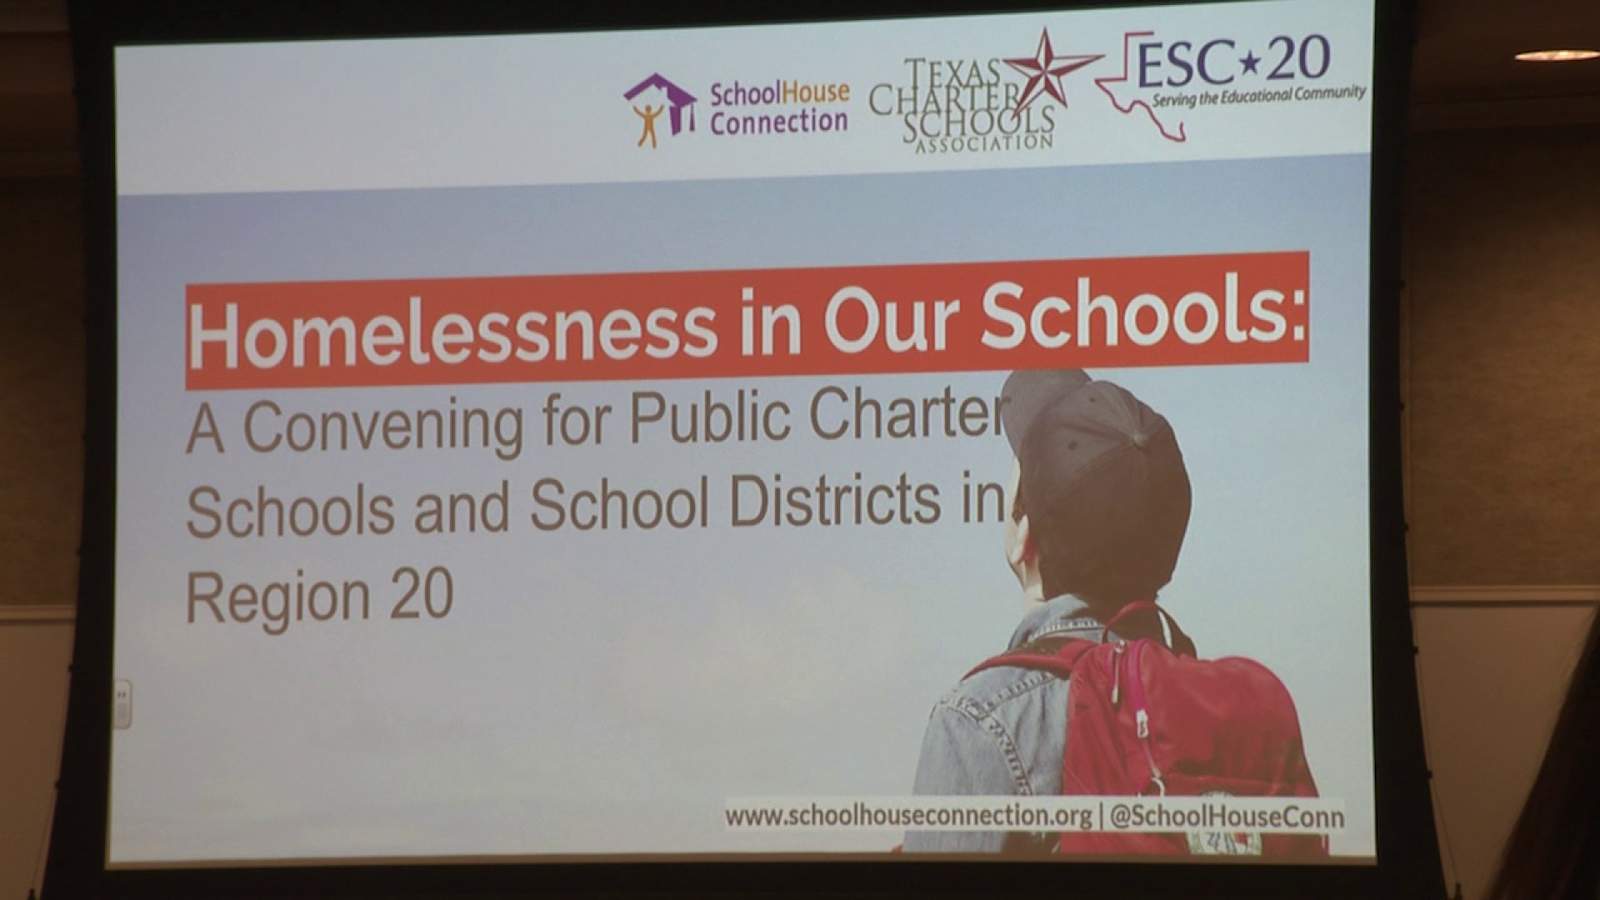 Youth homelessness crisis addressed at Education Service Center event